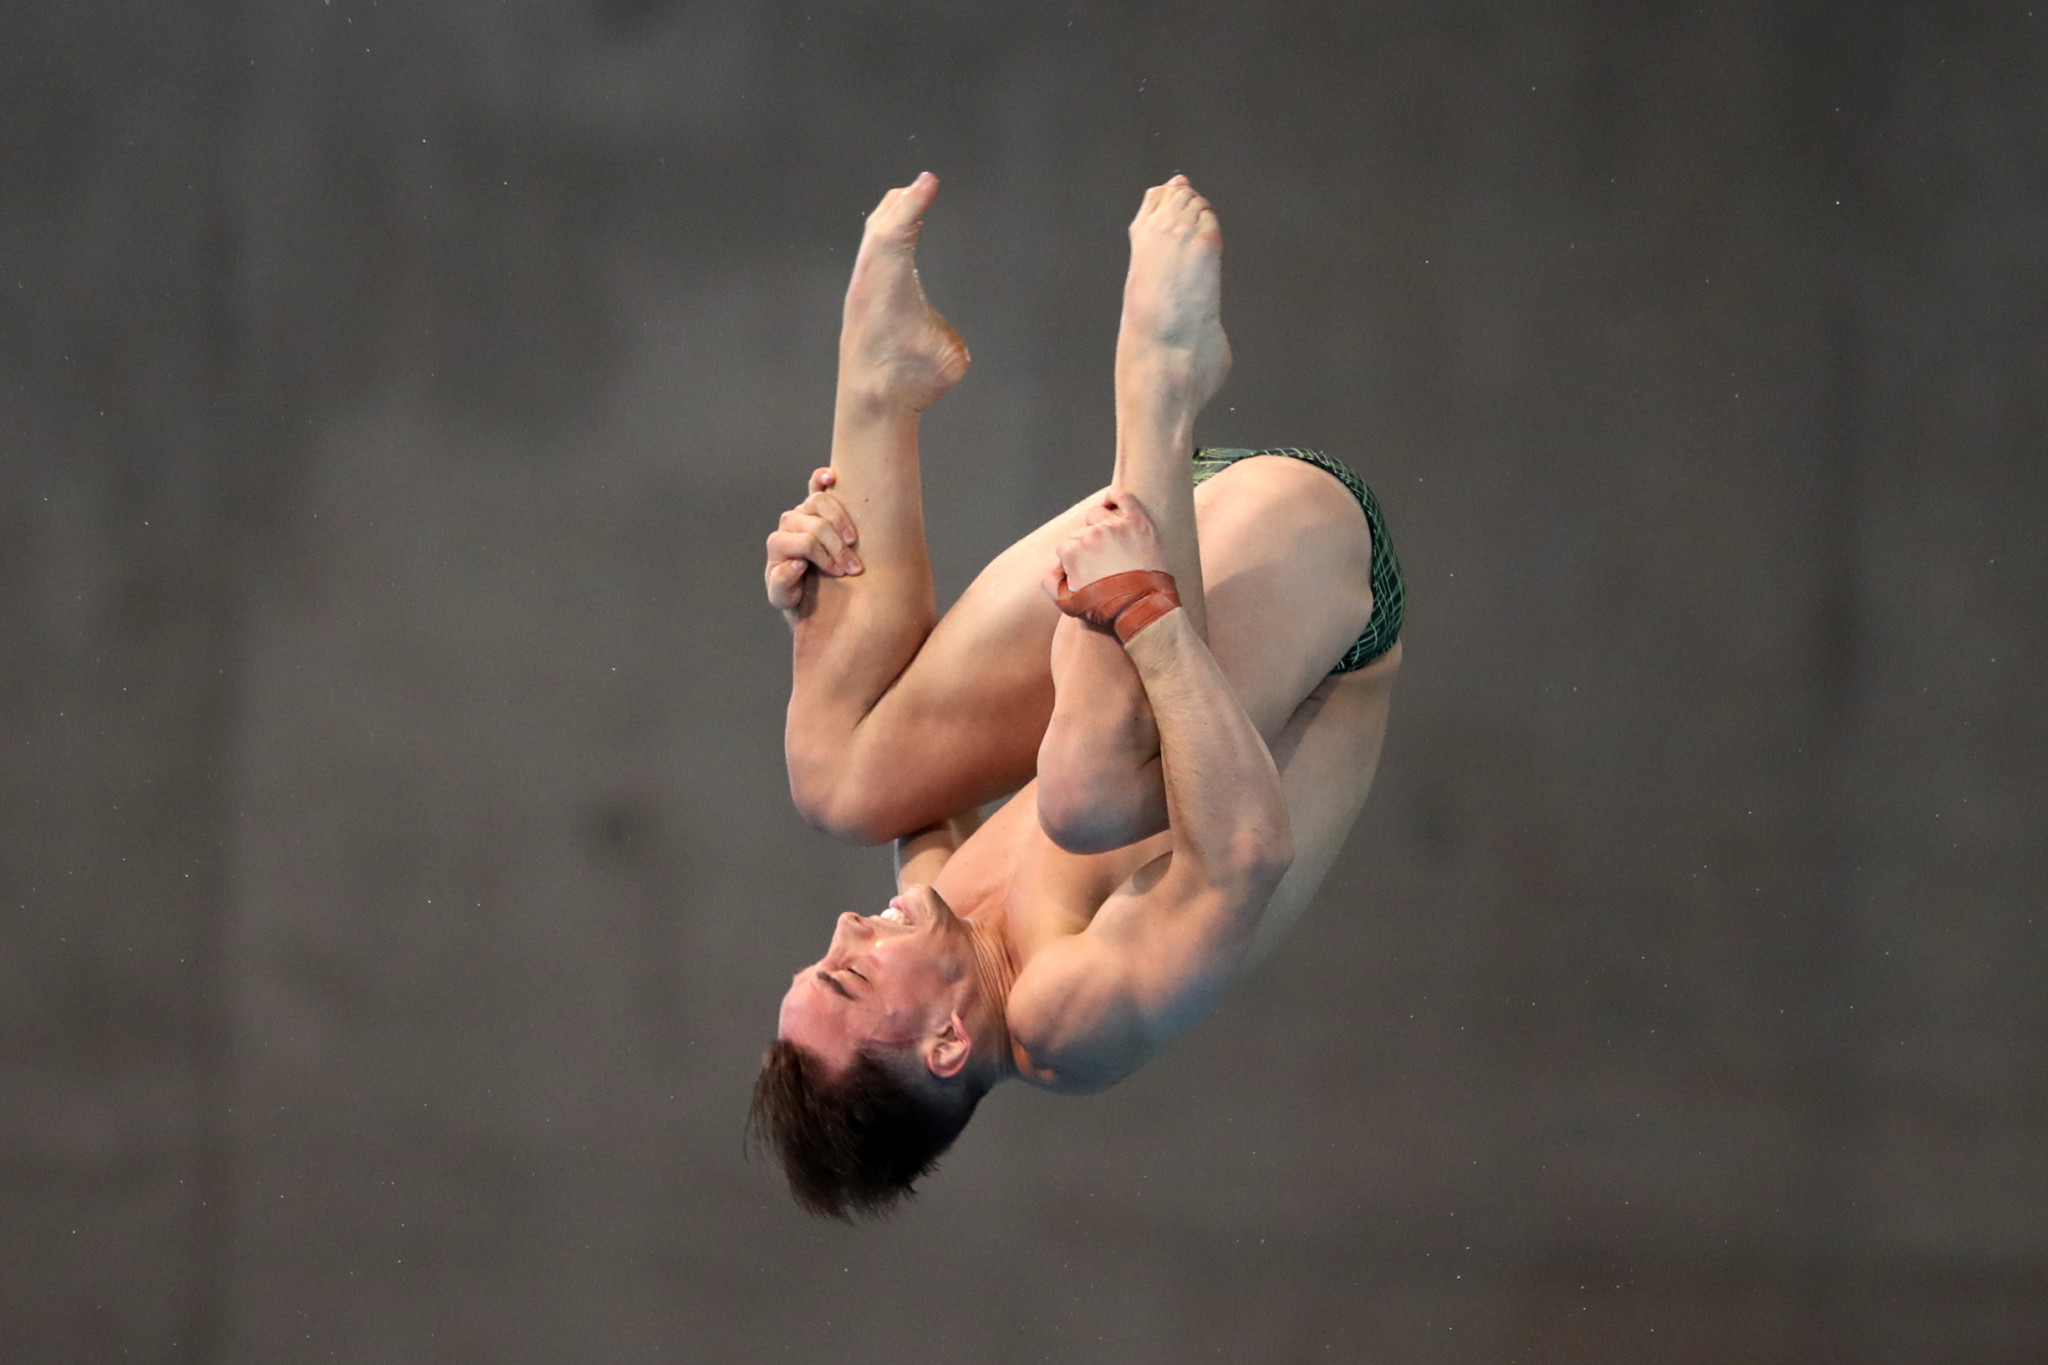 Domonic Bedggood of Australia won the men's platform at the Oceania Diving Championships ©Getty Images